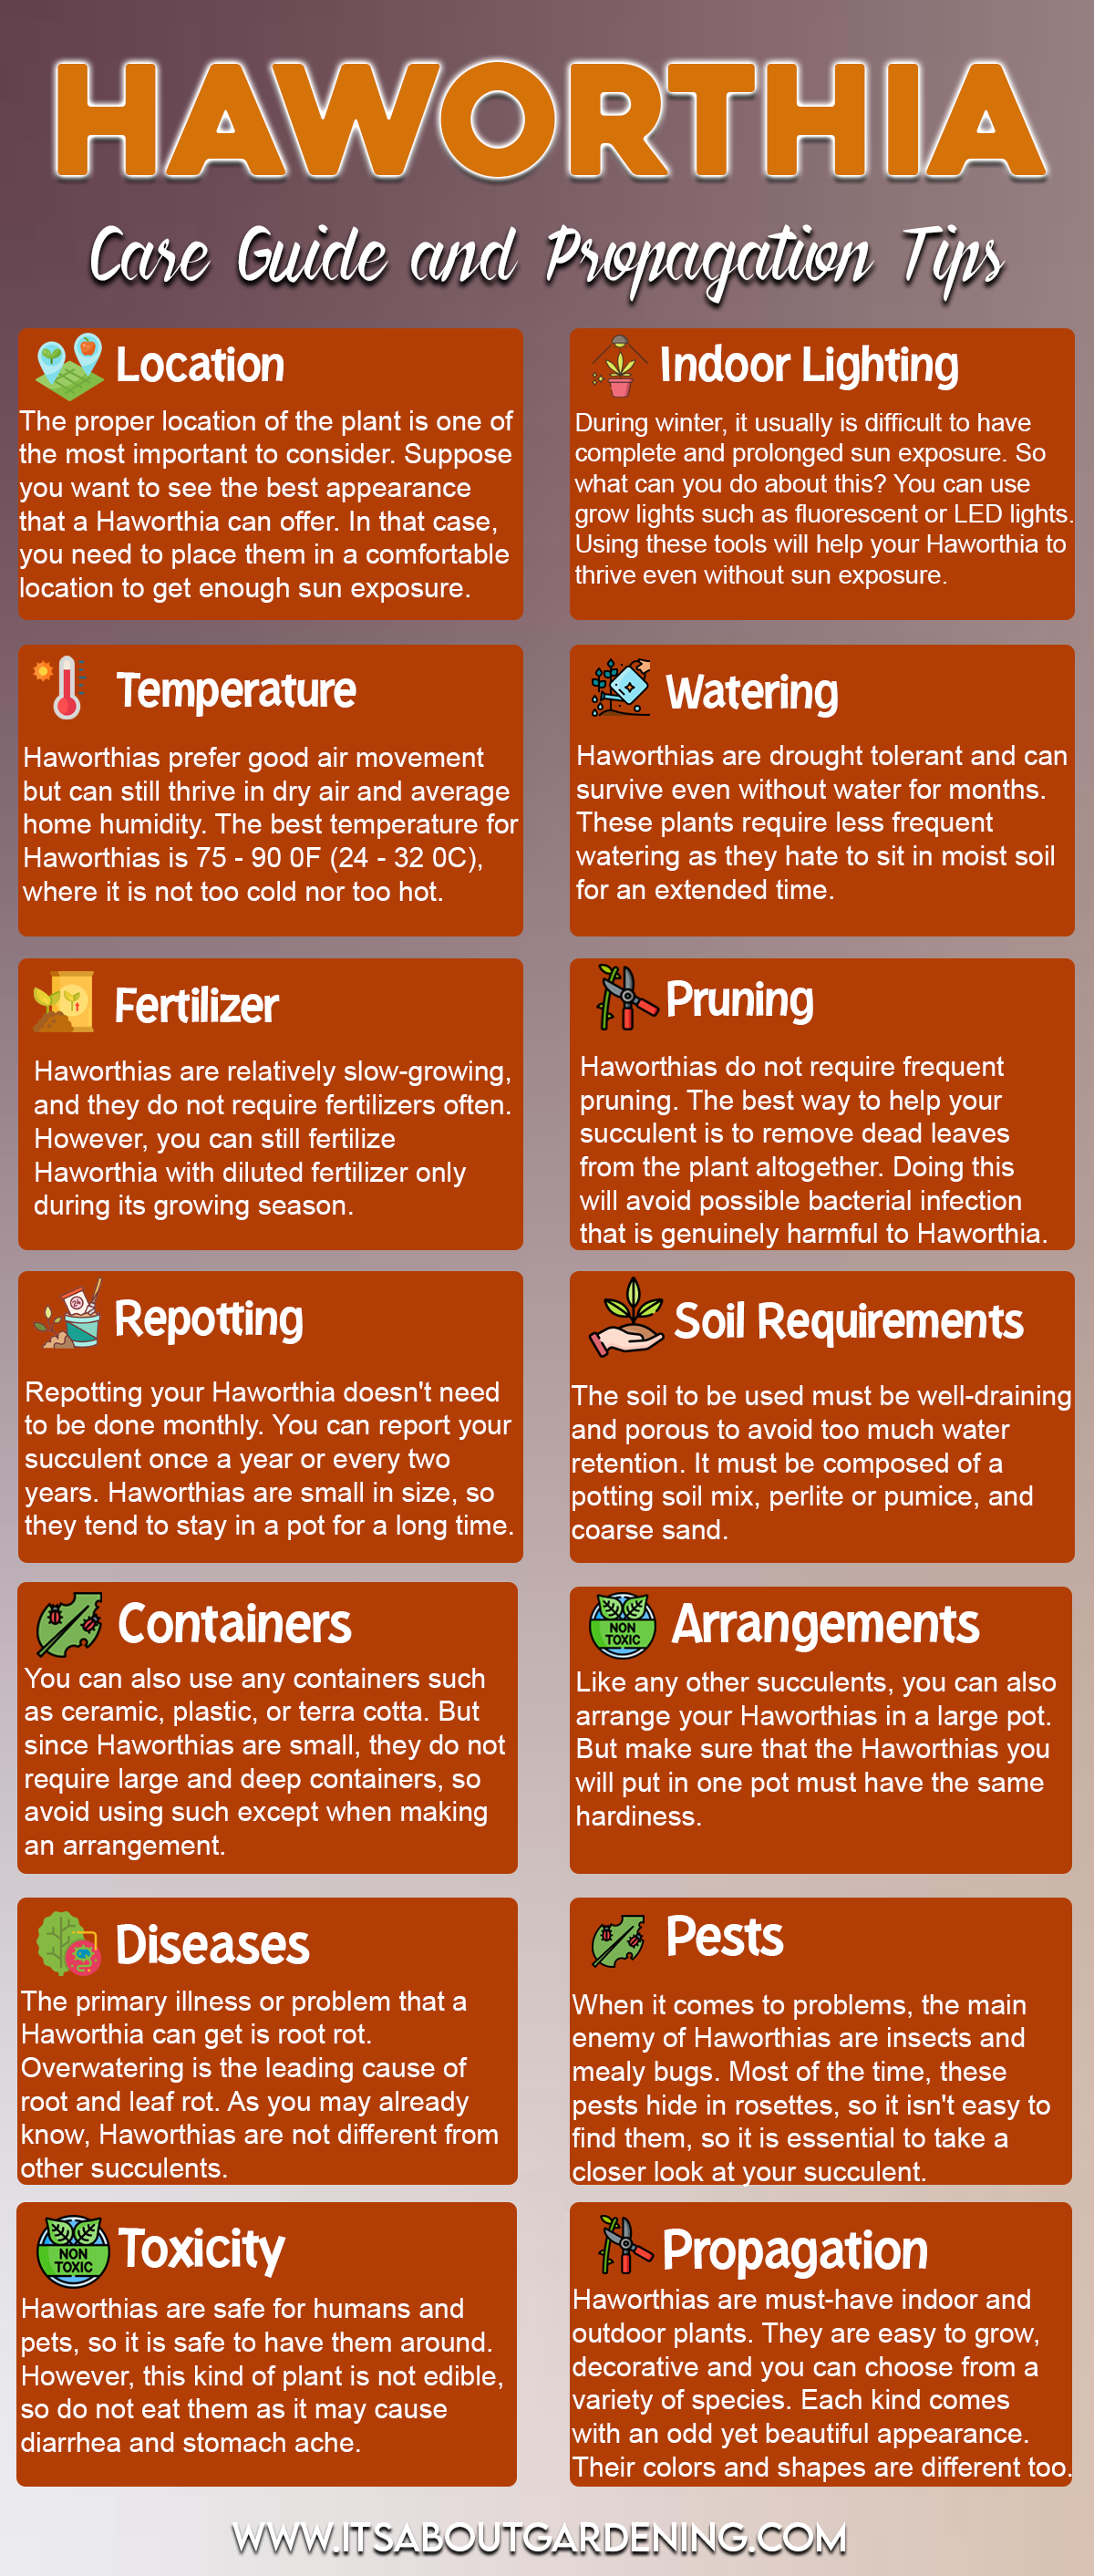 Haworthia Care Guide and Propagation Tips Infographic